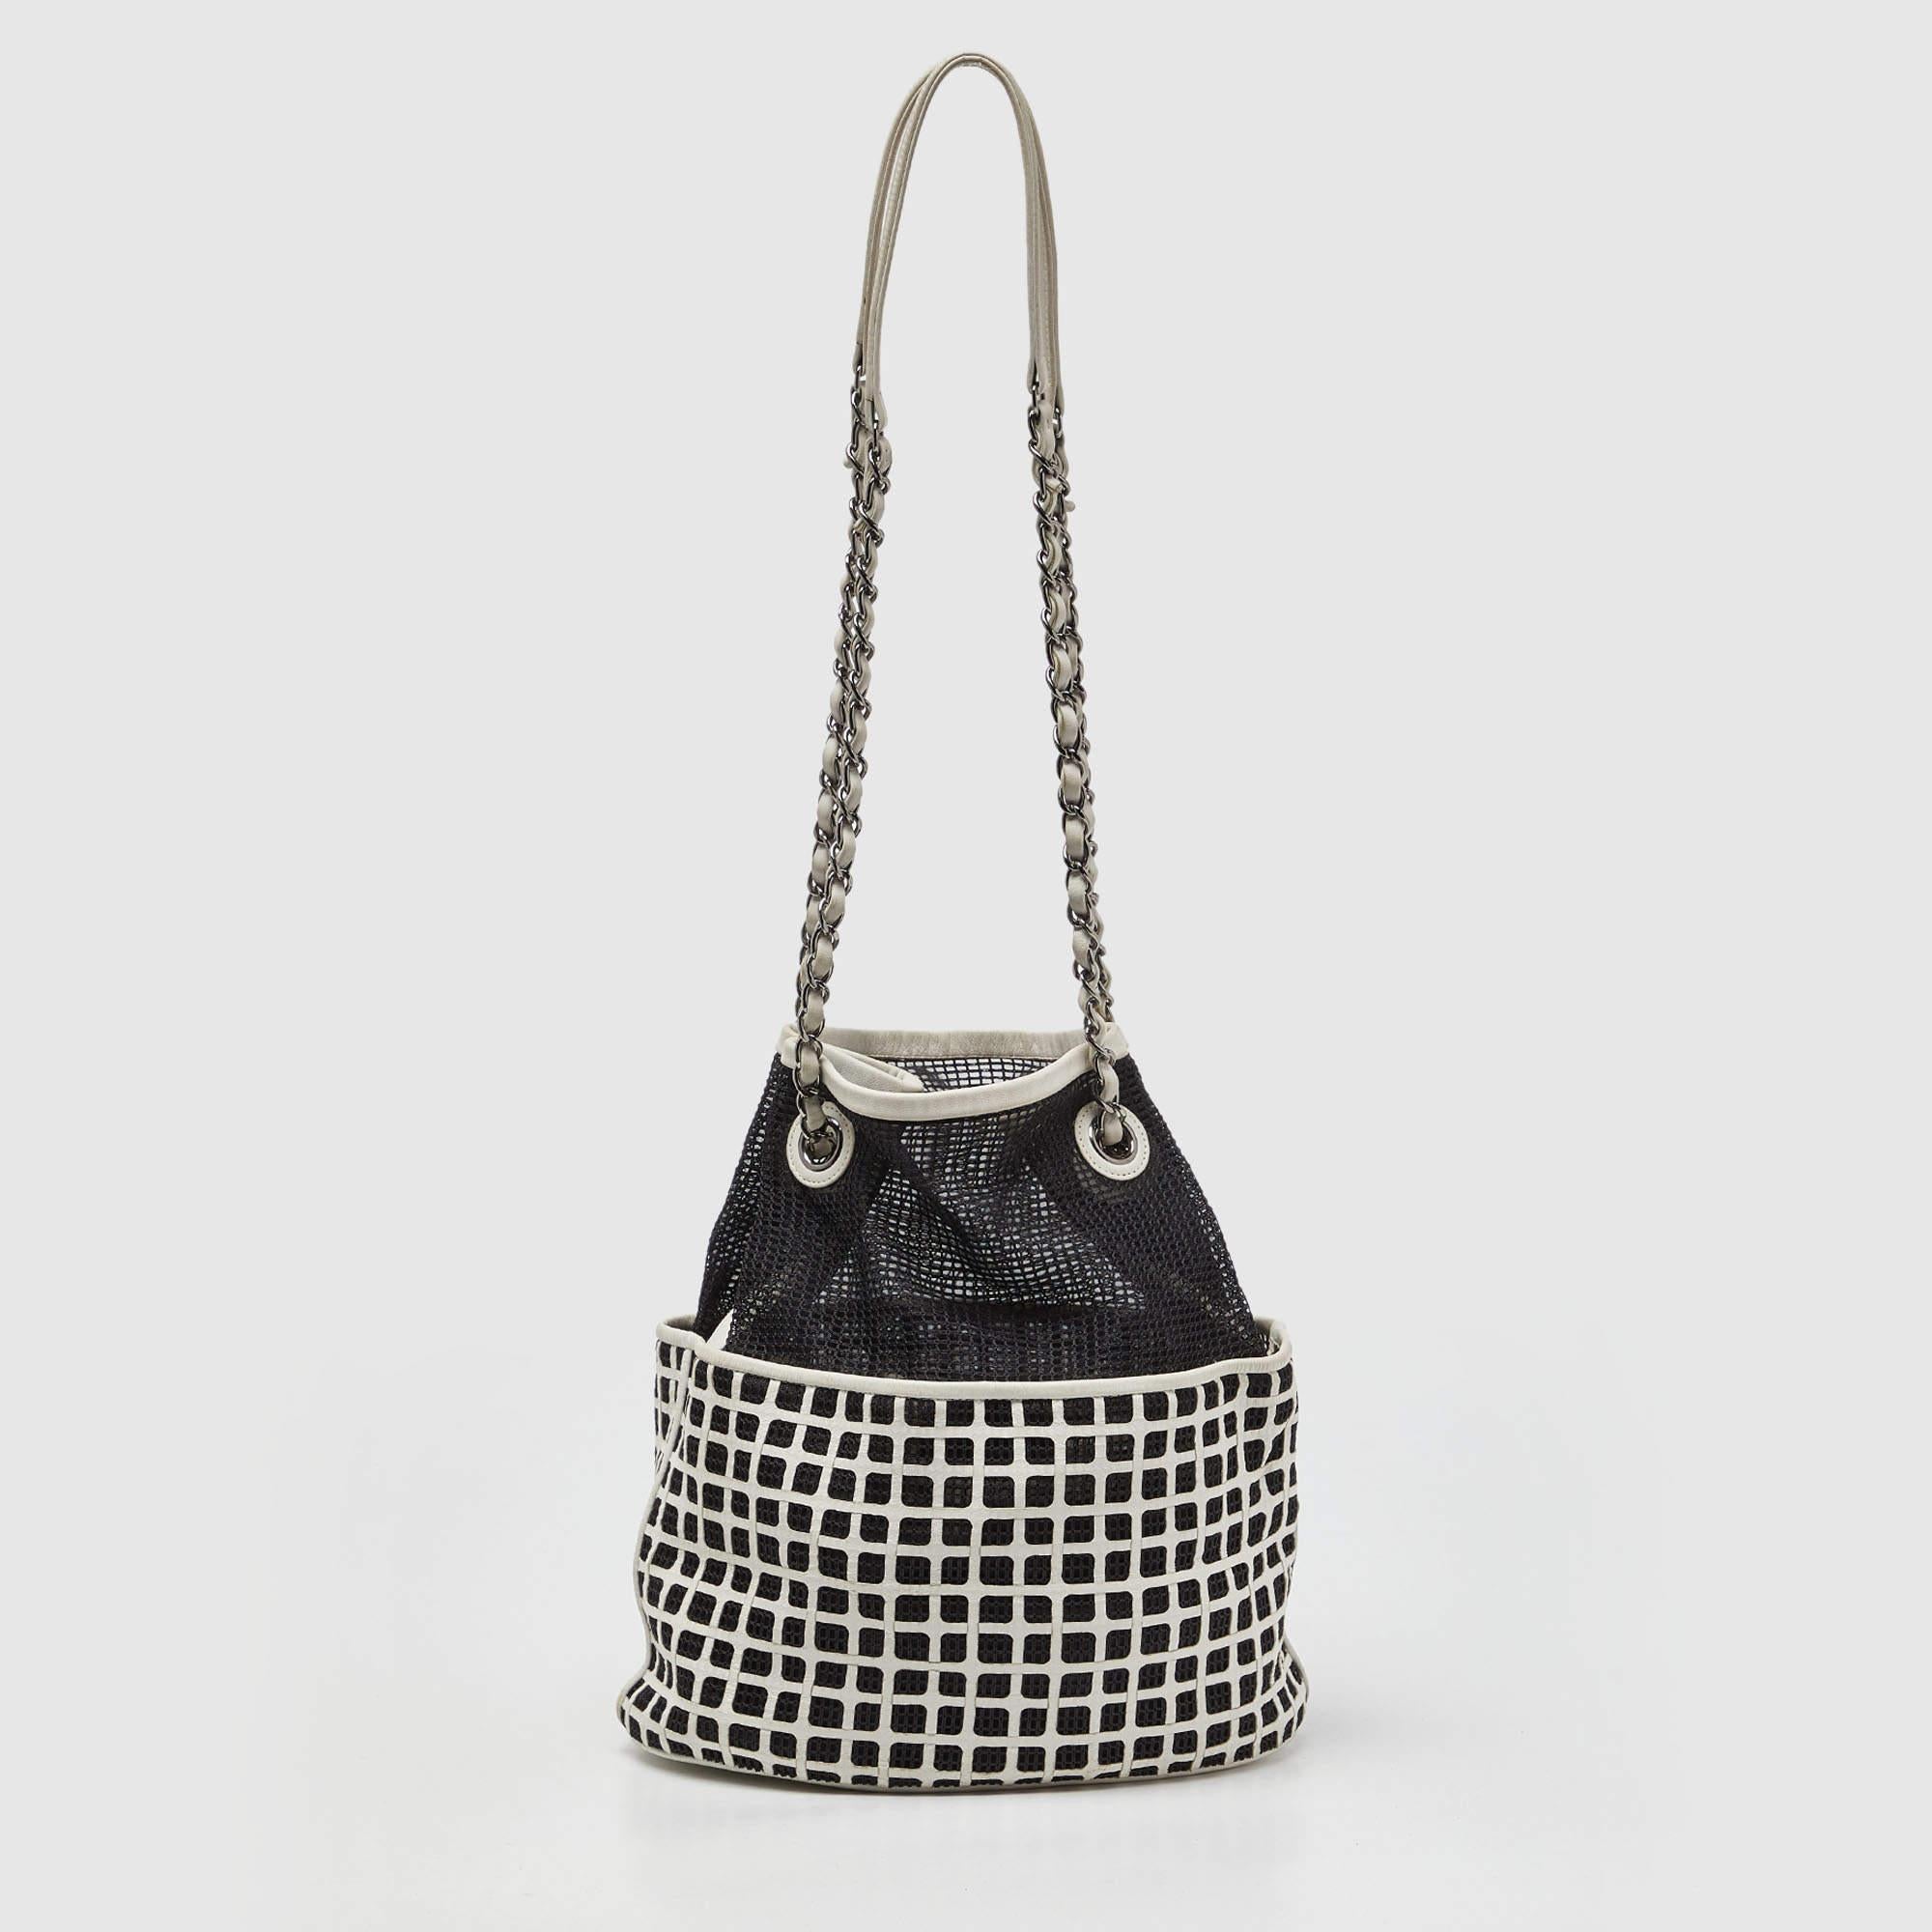 Chanel Black/White Mesh and Leather Bucket Bag For Sale 2